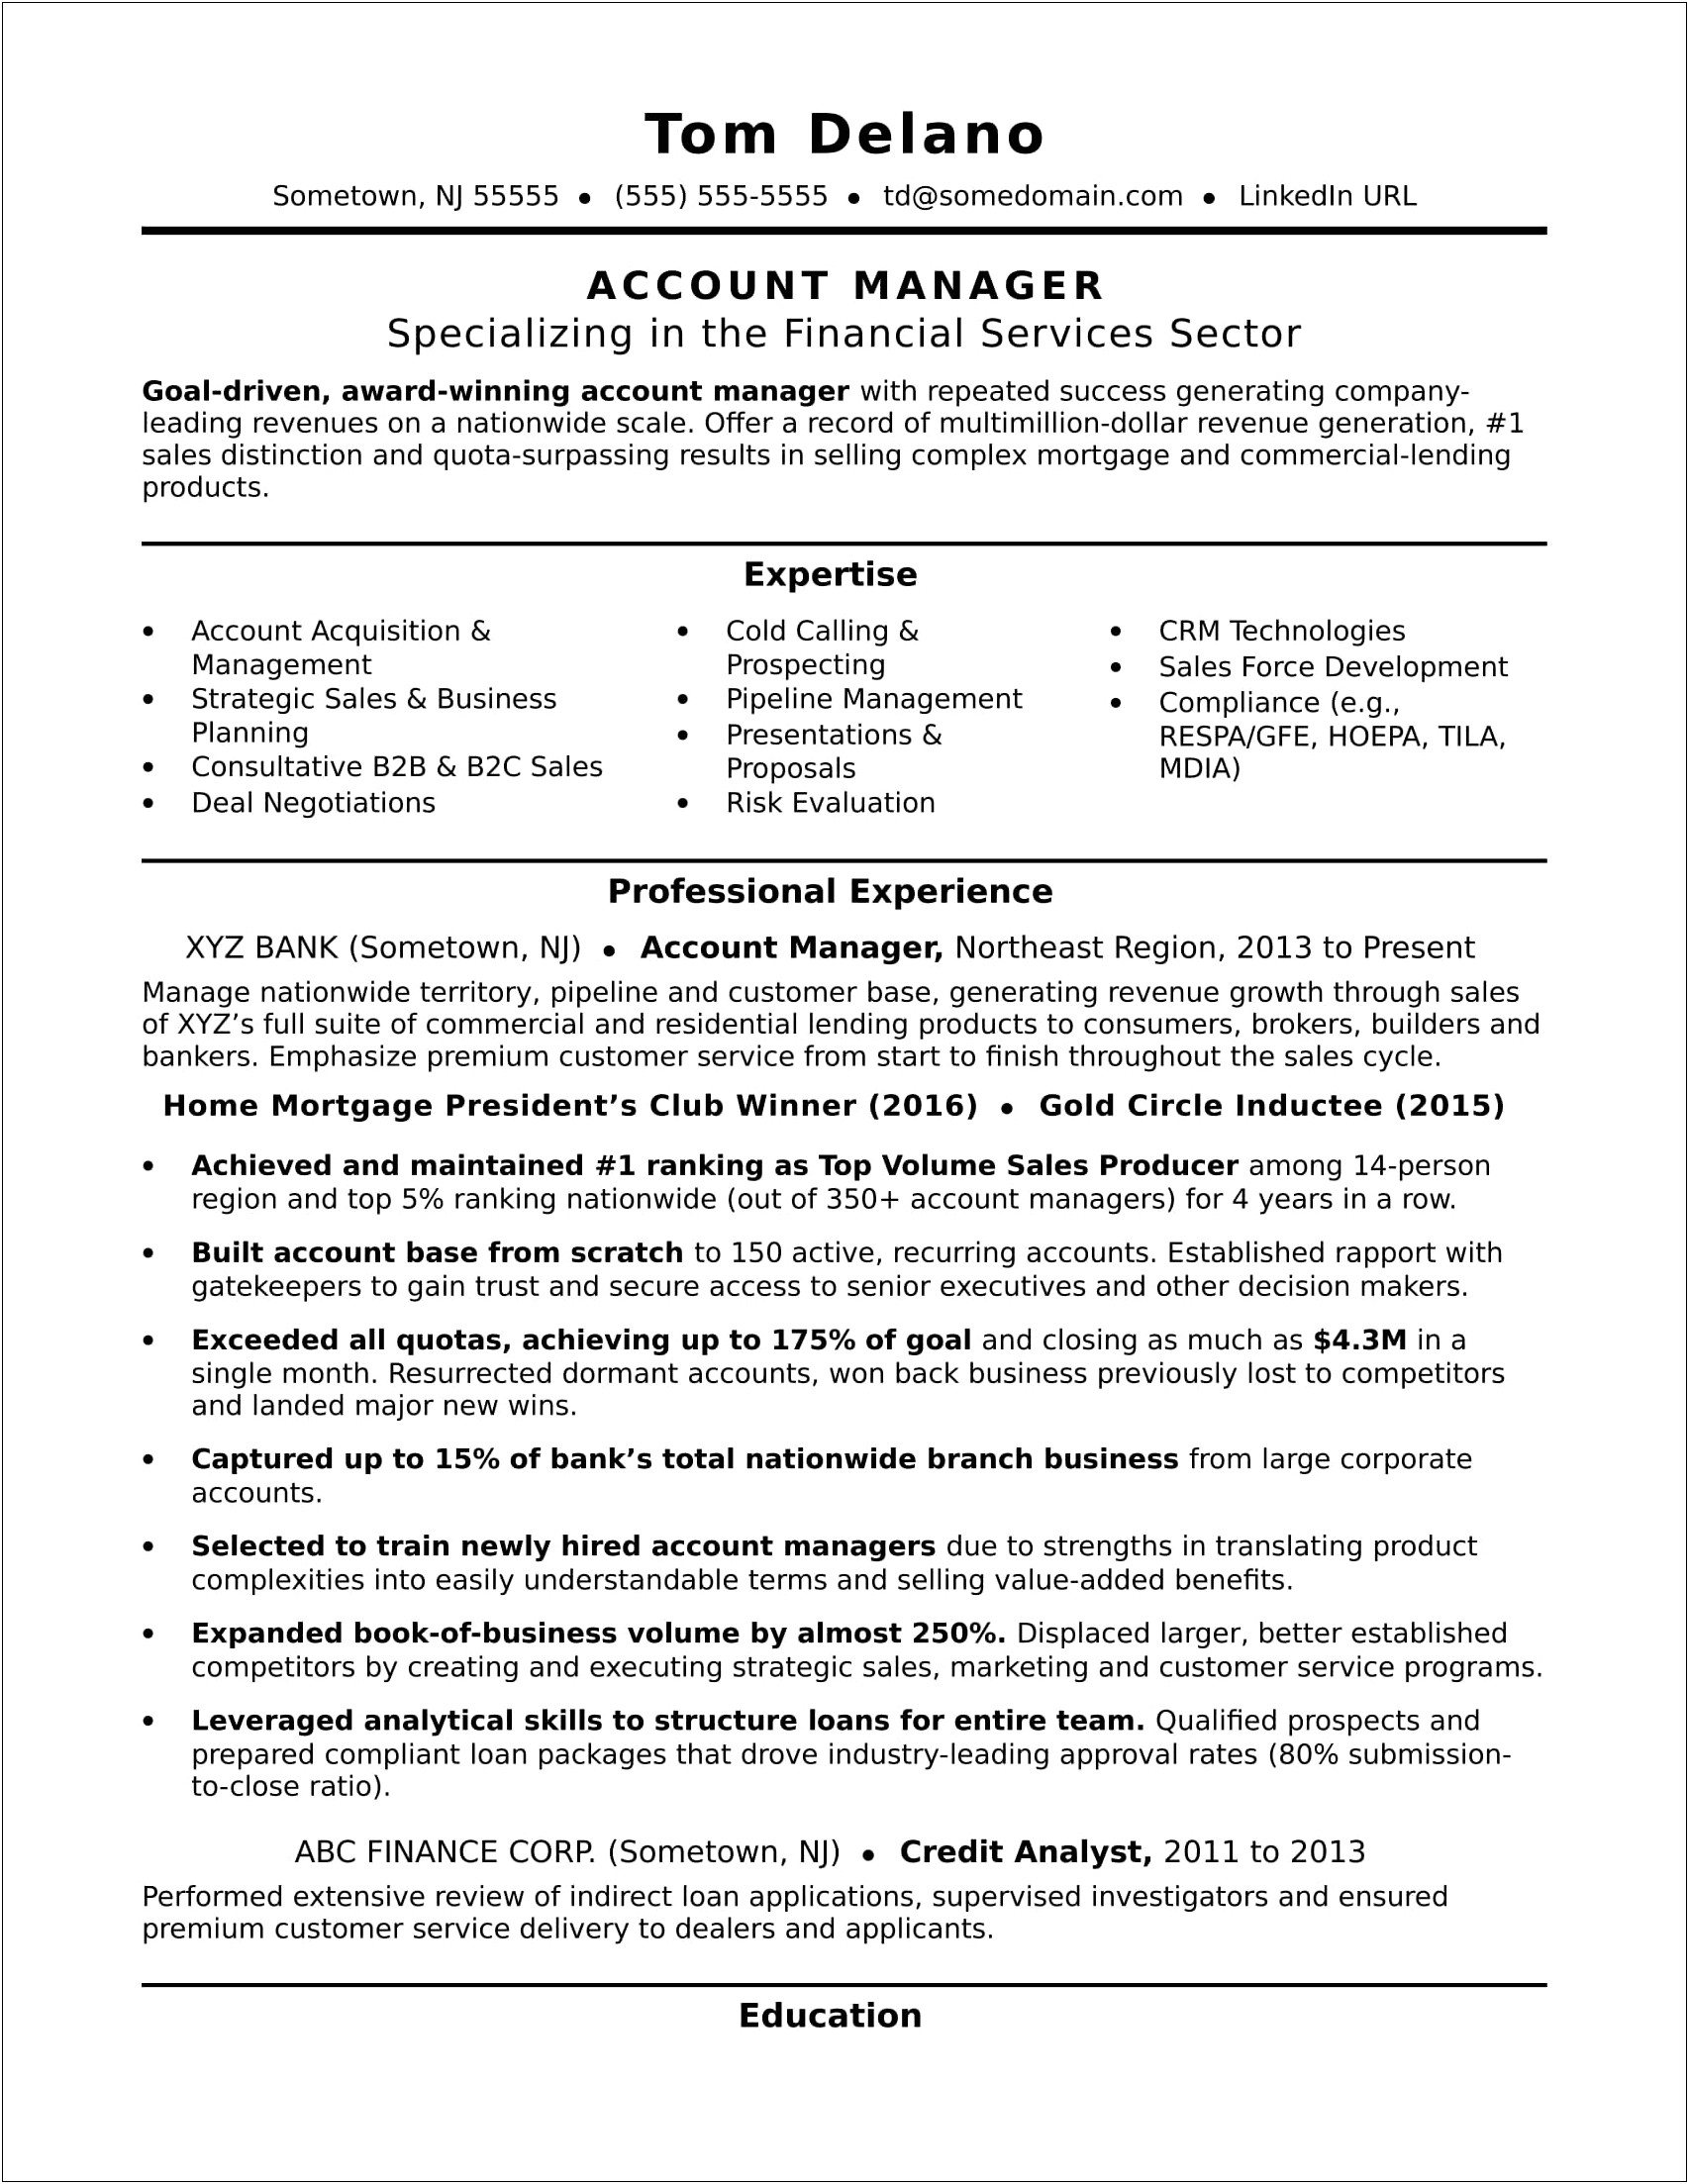 Resume For Customer Service Account Manager